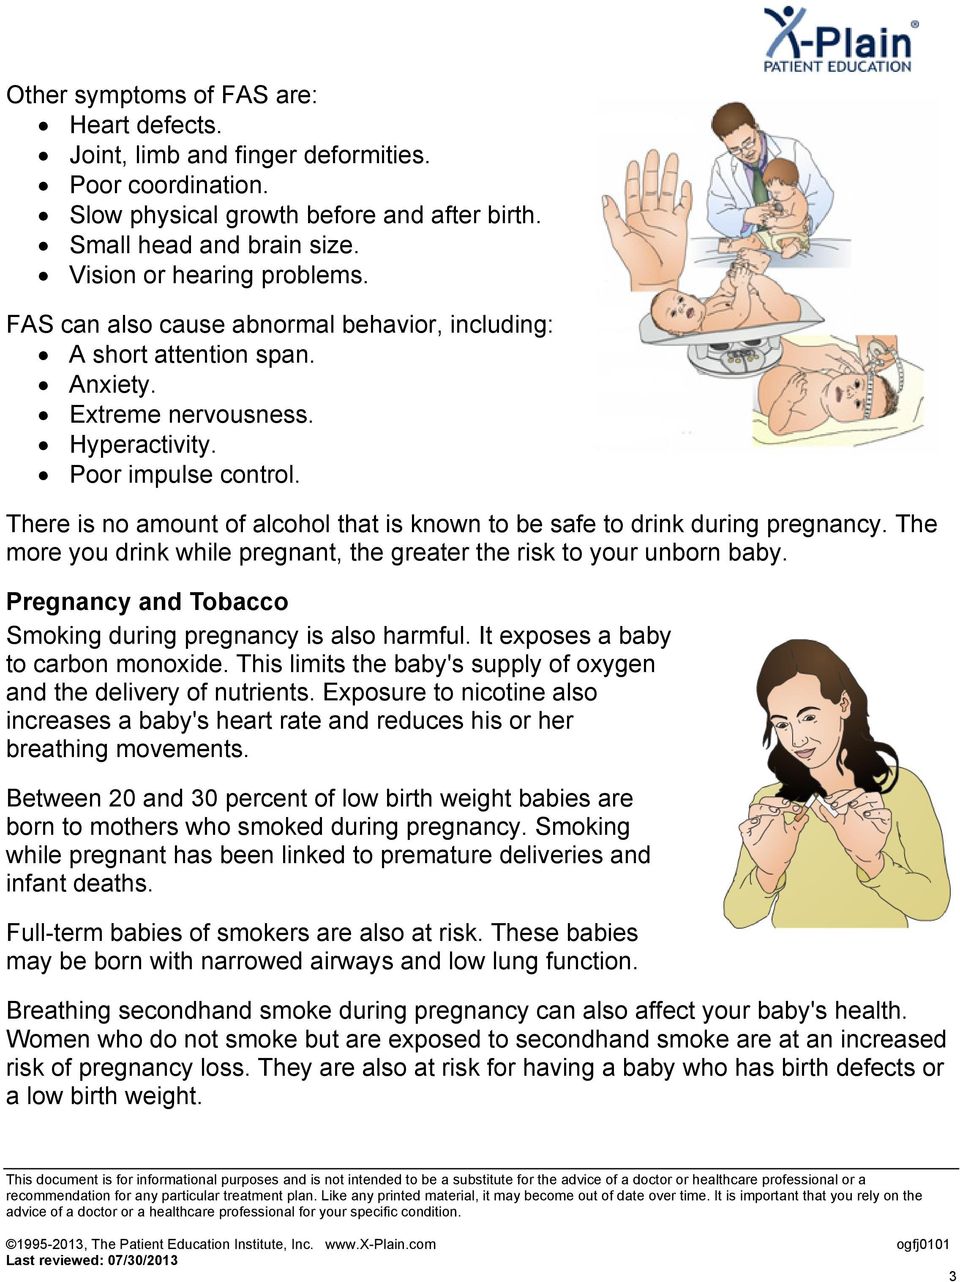 There is no amount of alcohol that is known to be safe to drink during pregnancy. The more you drink while pregnant, the greater the risk to your unborn baby.